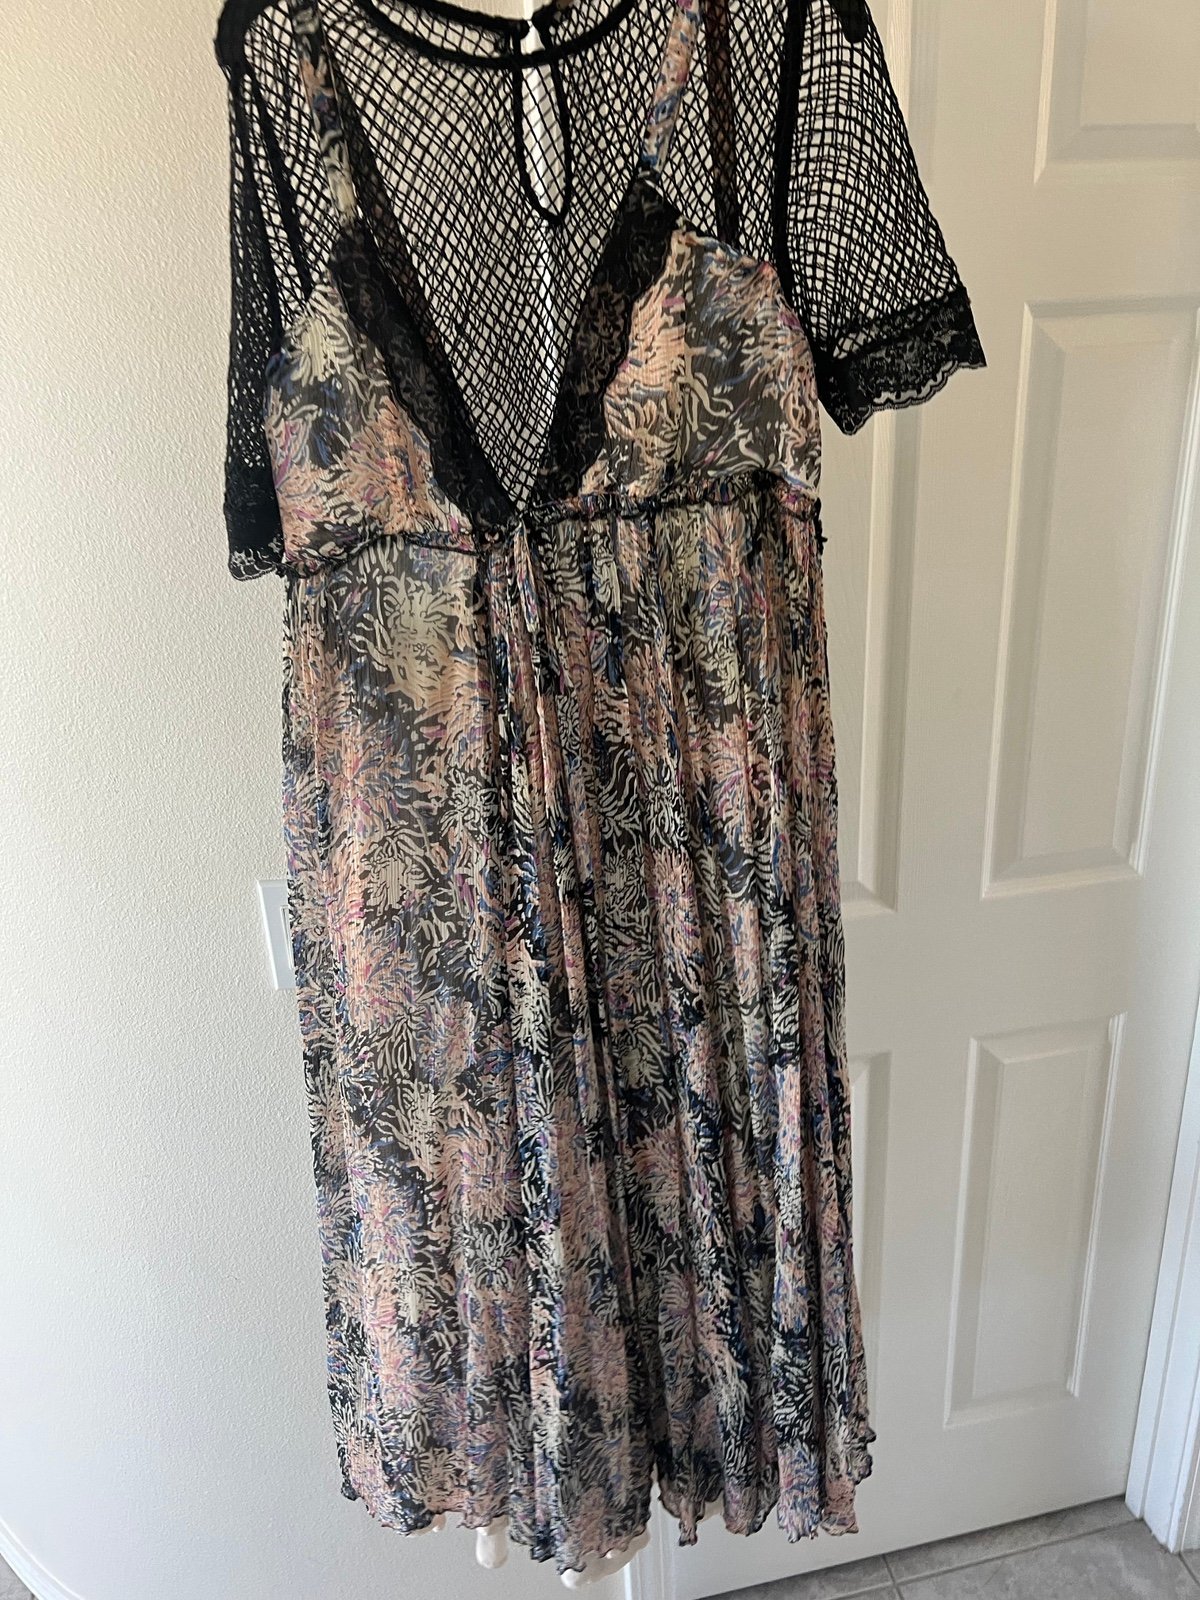 Promotions  Free People maxi dress M KbXP0afc9 well sal